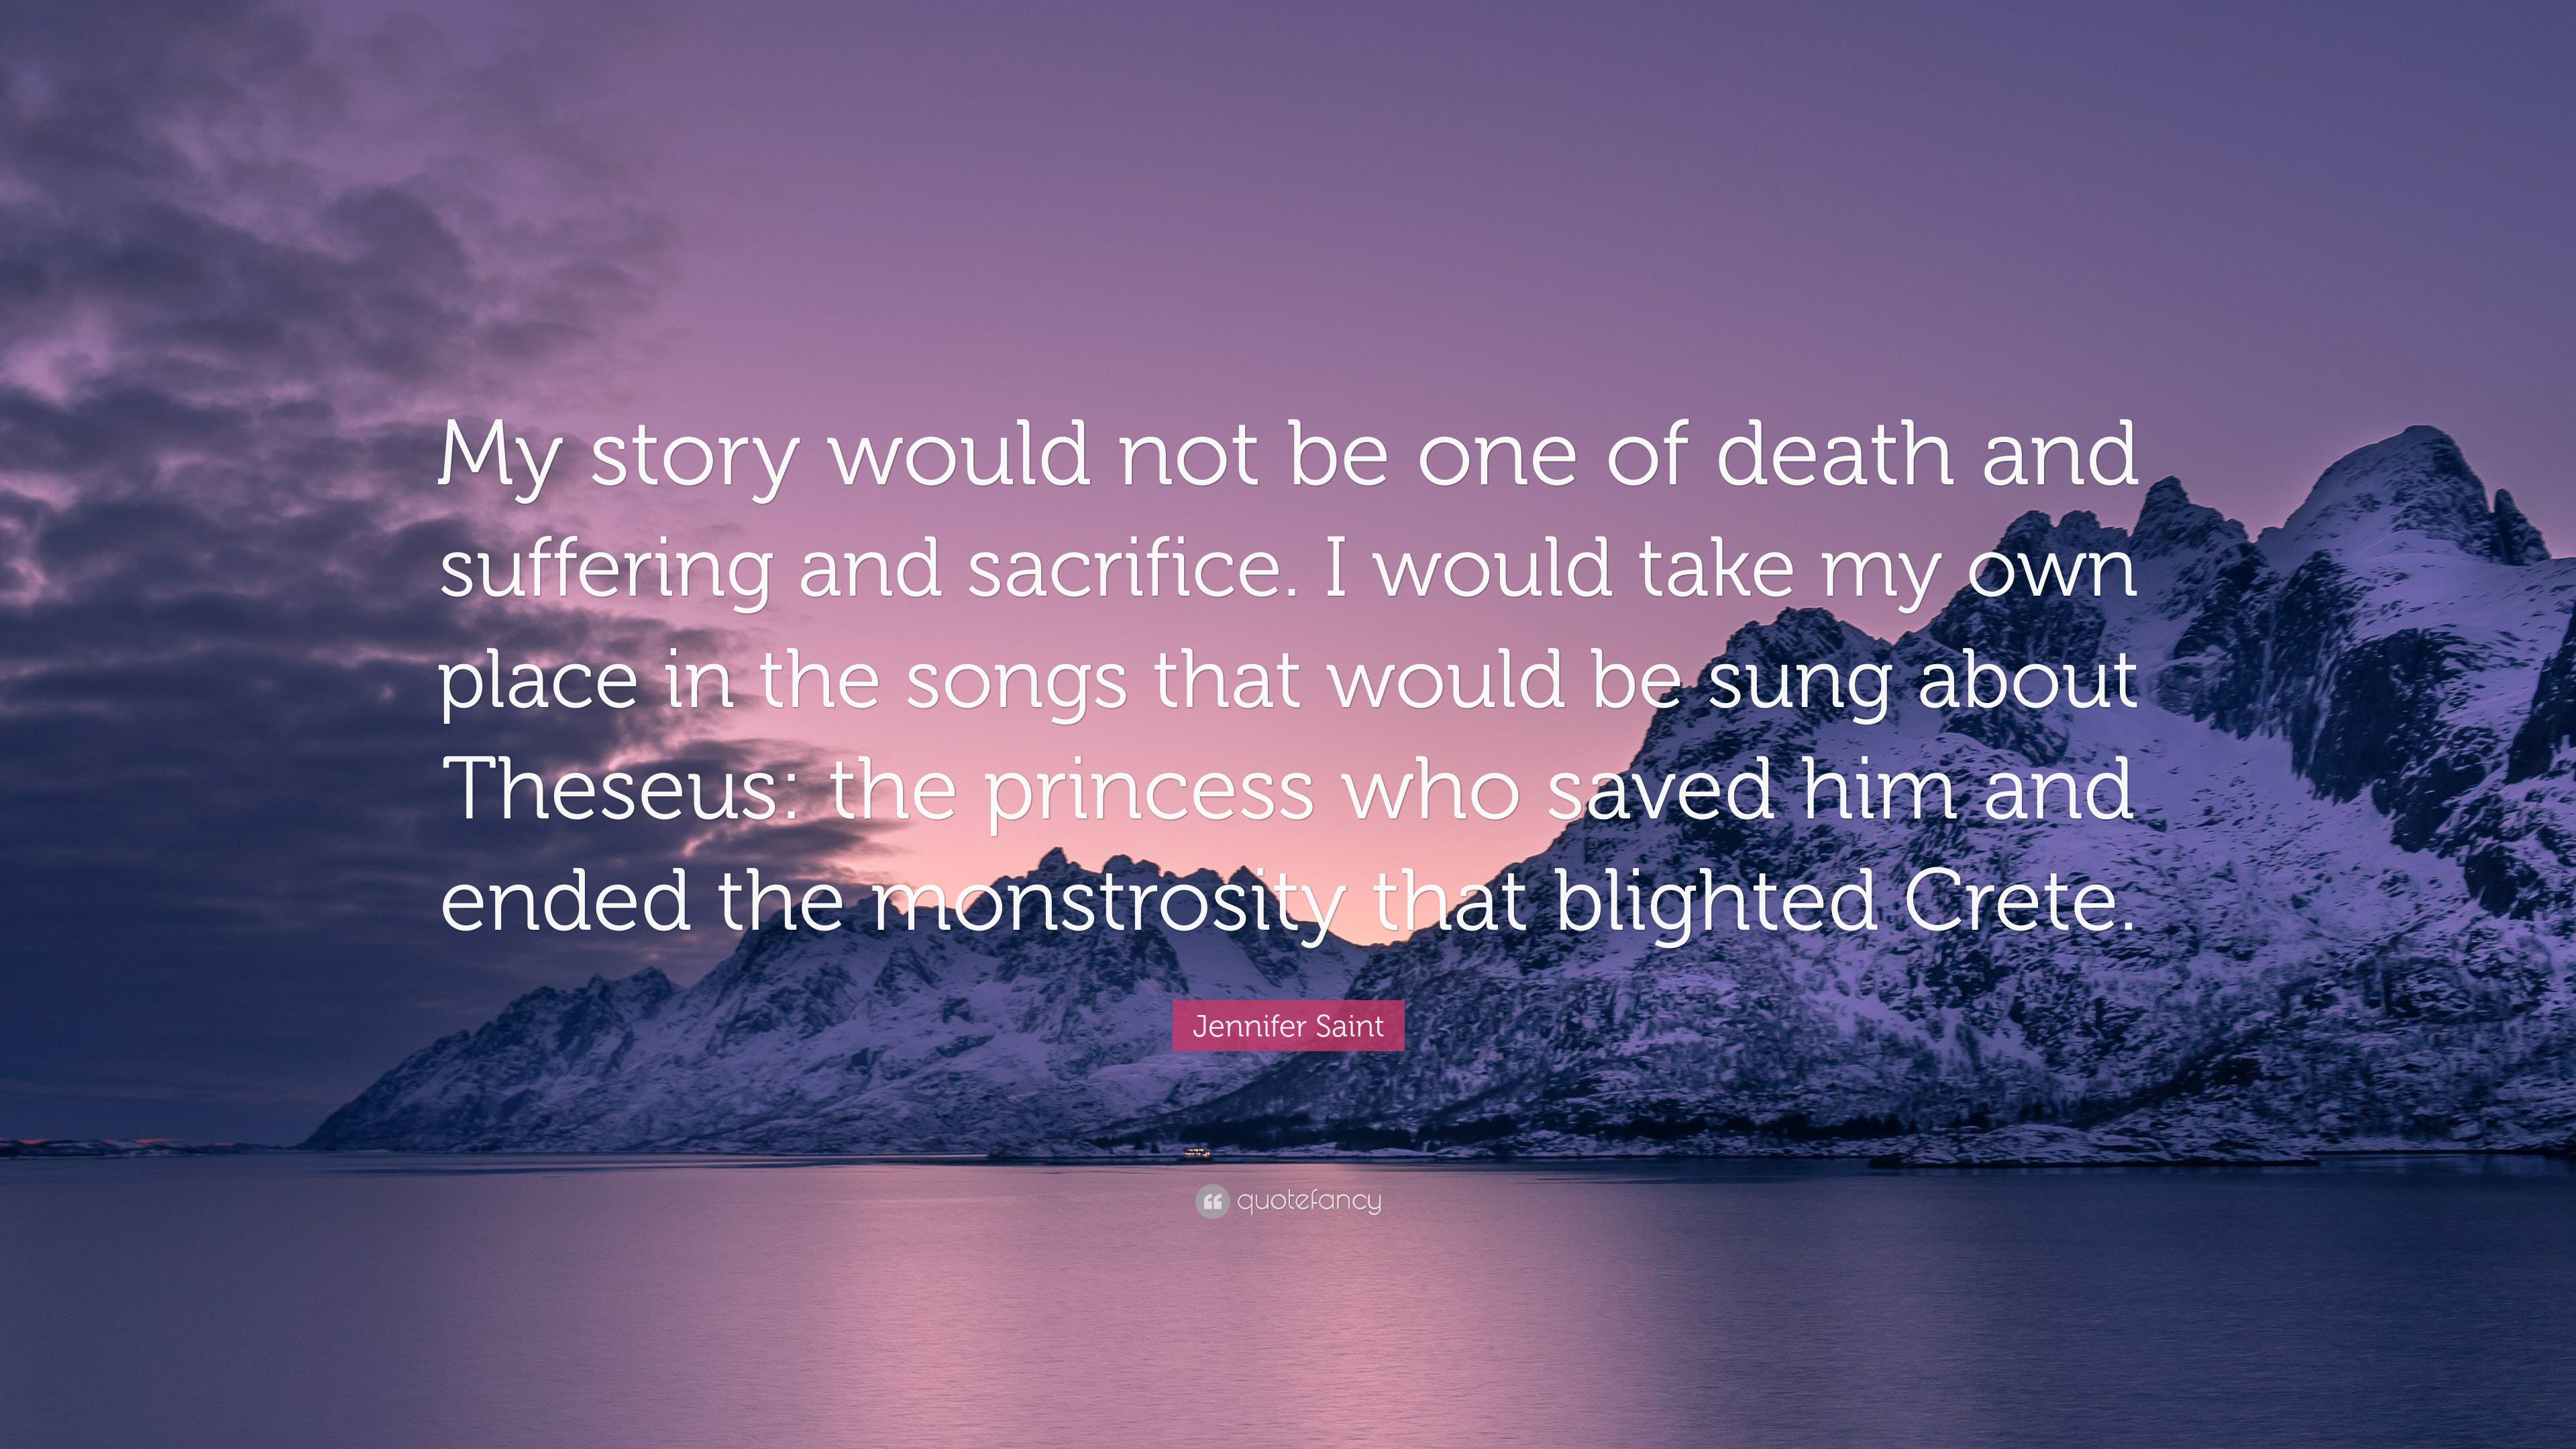 Jennifer Saint Quote: “My story would not be one of death and suffering ...